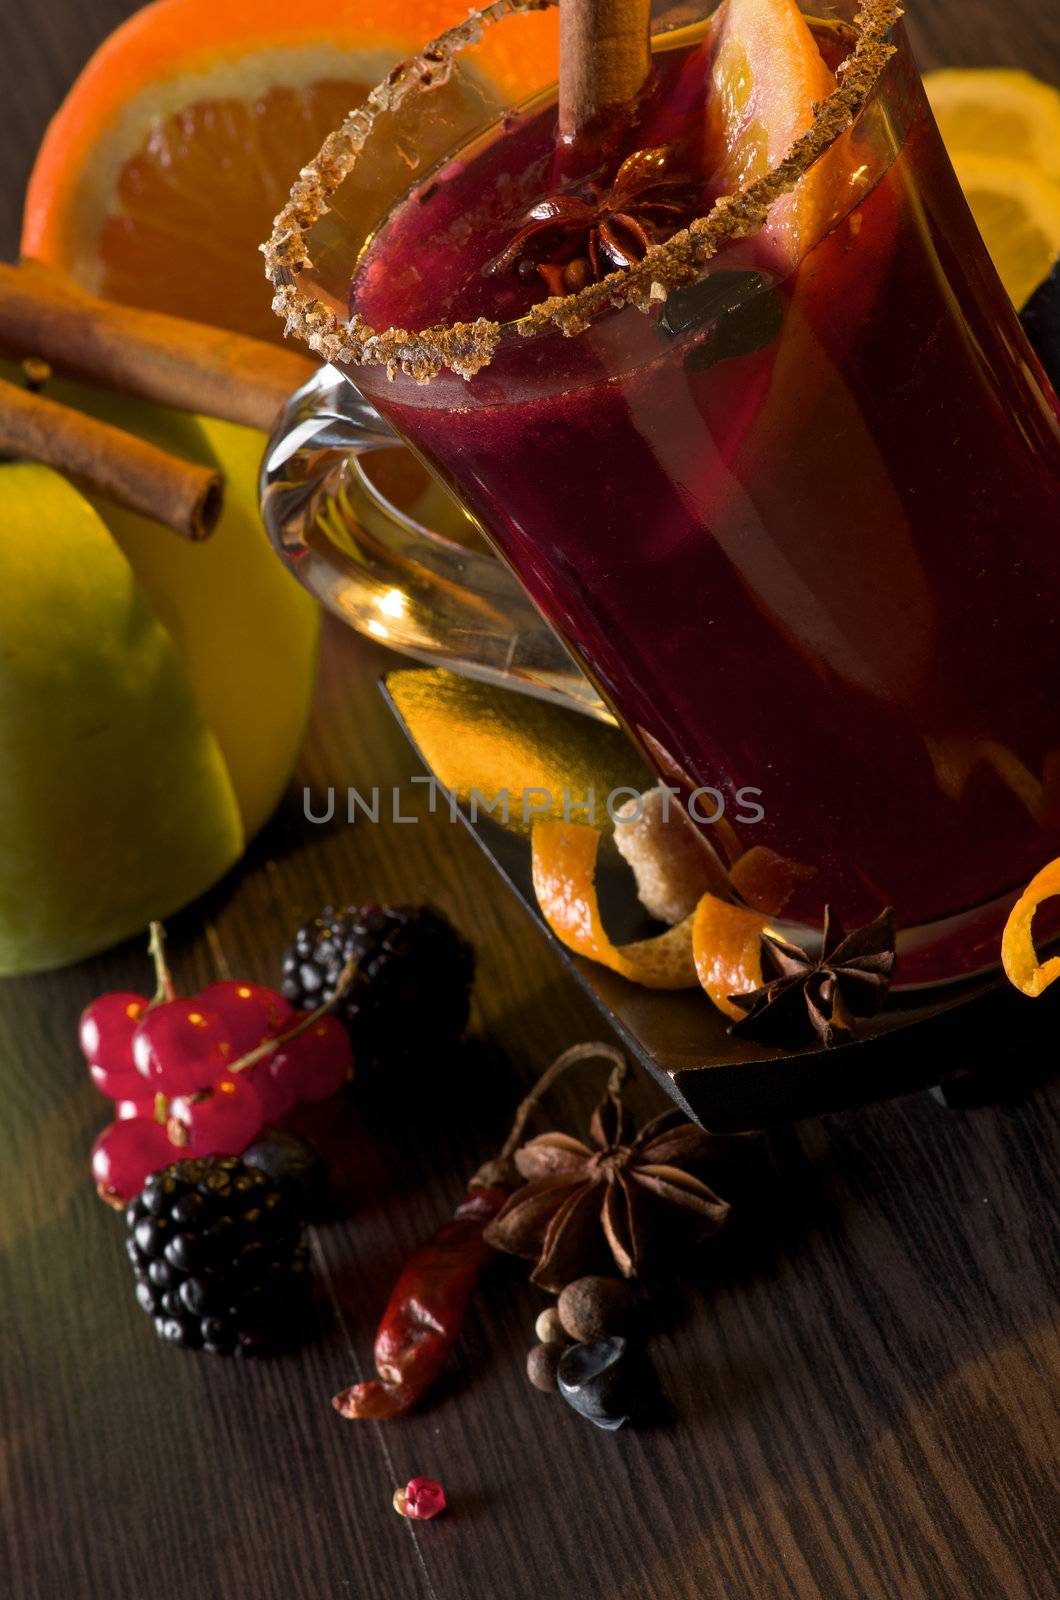 Mulled Wine and Fruits by zhekos